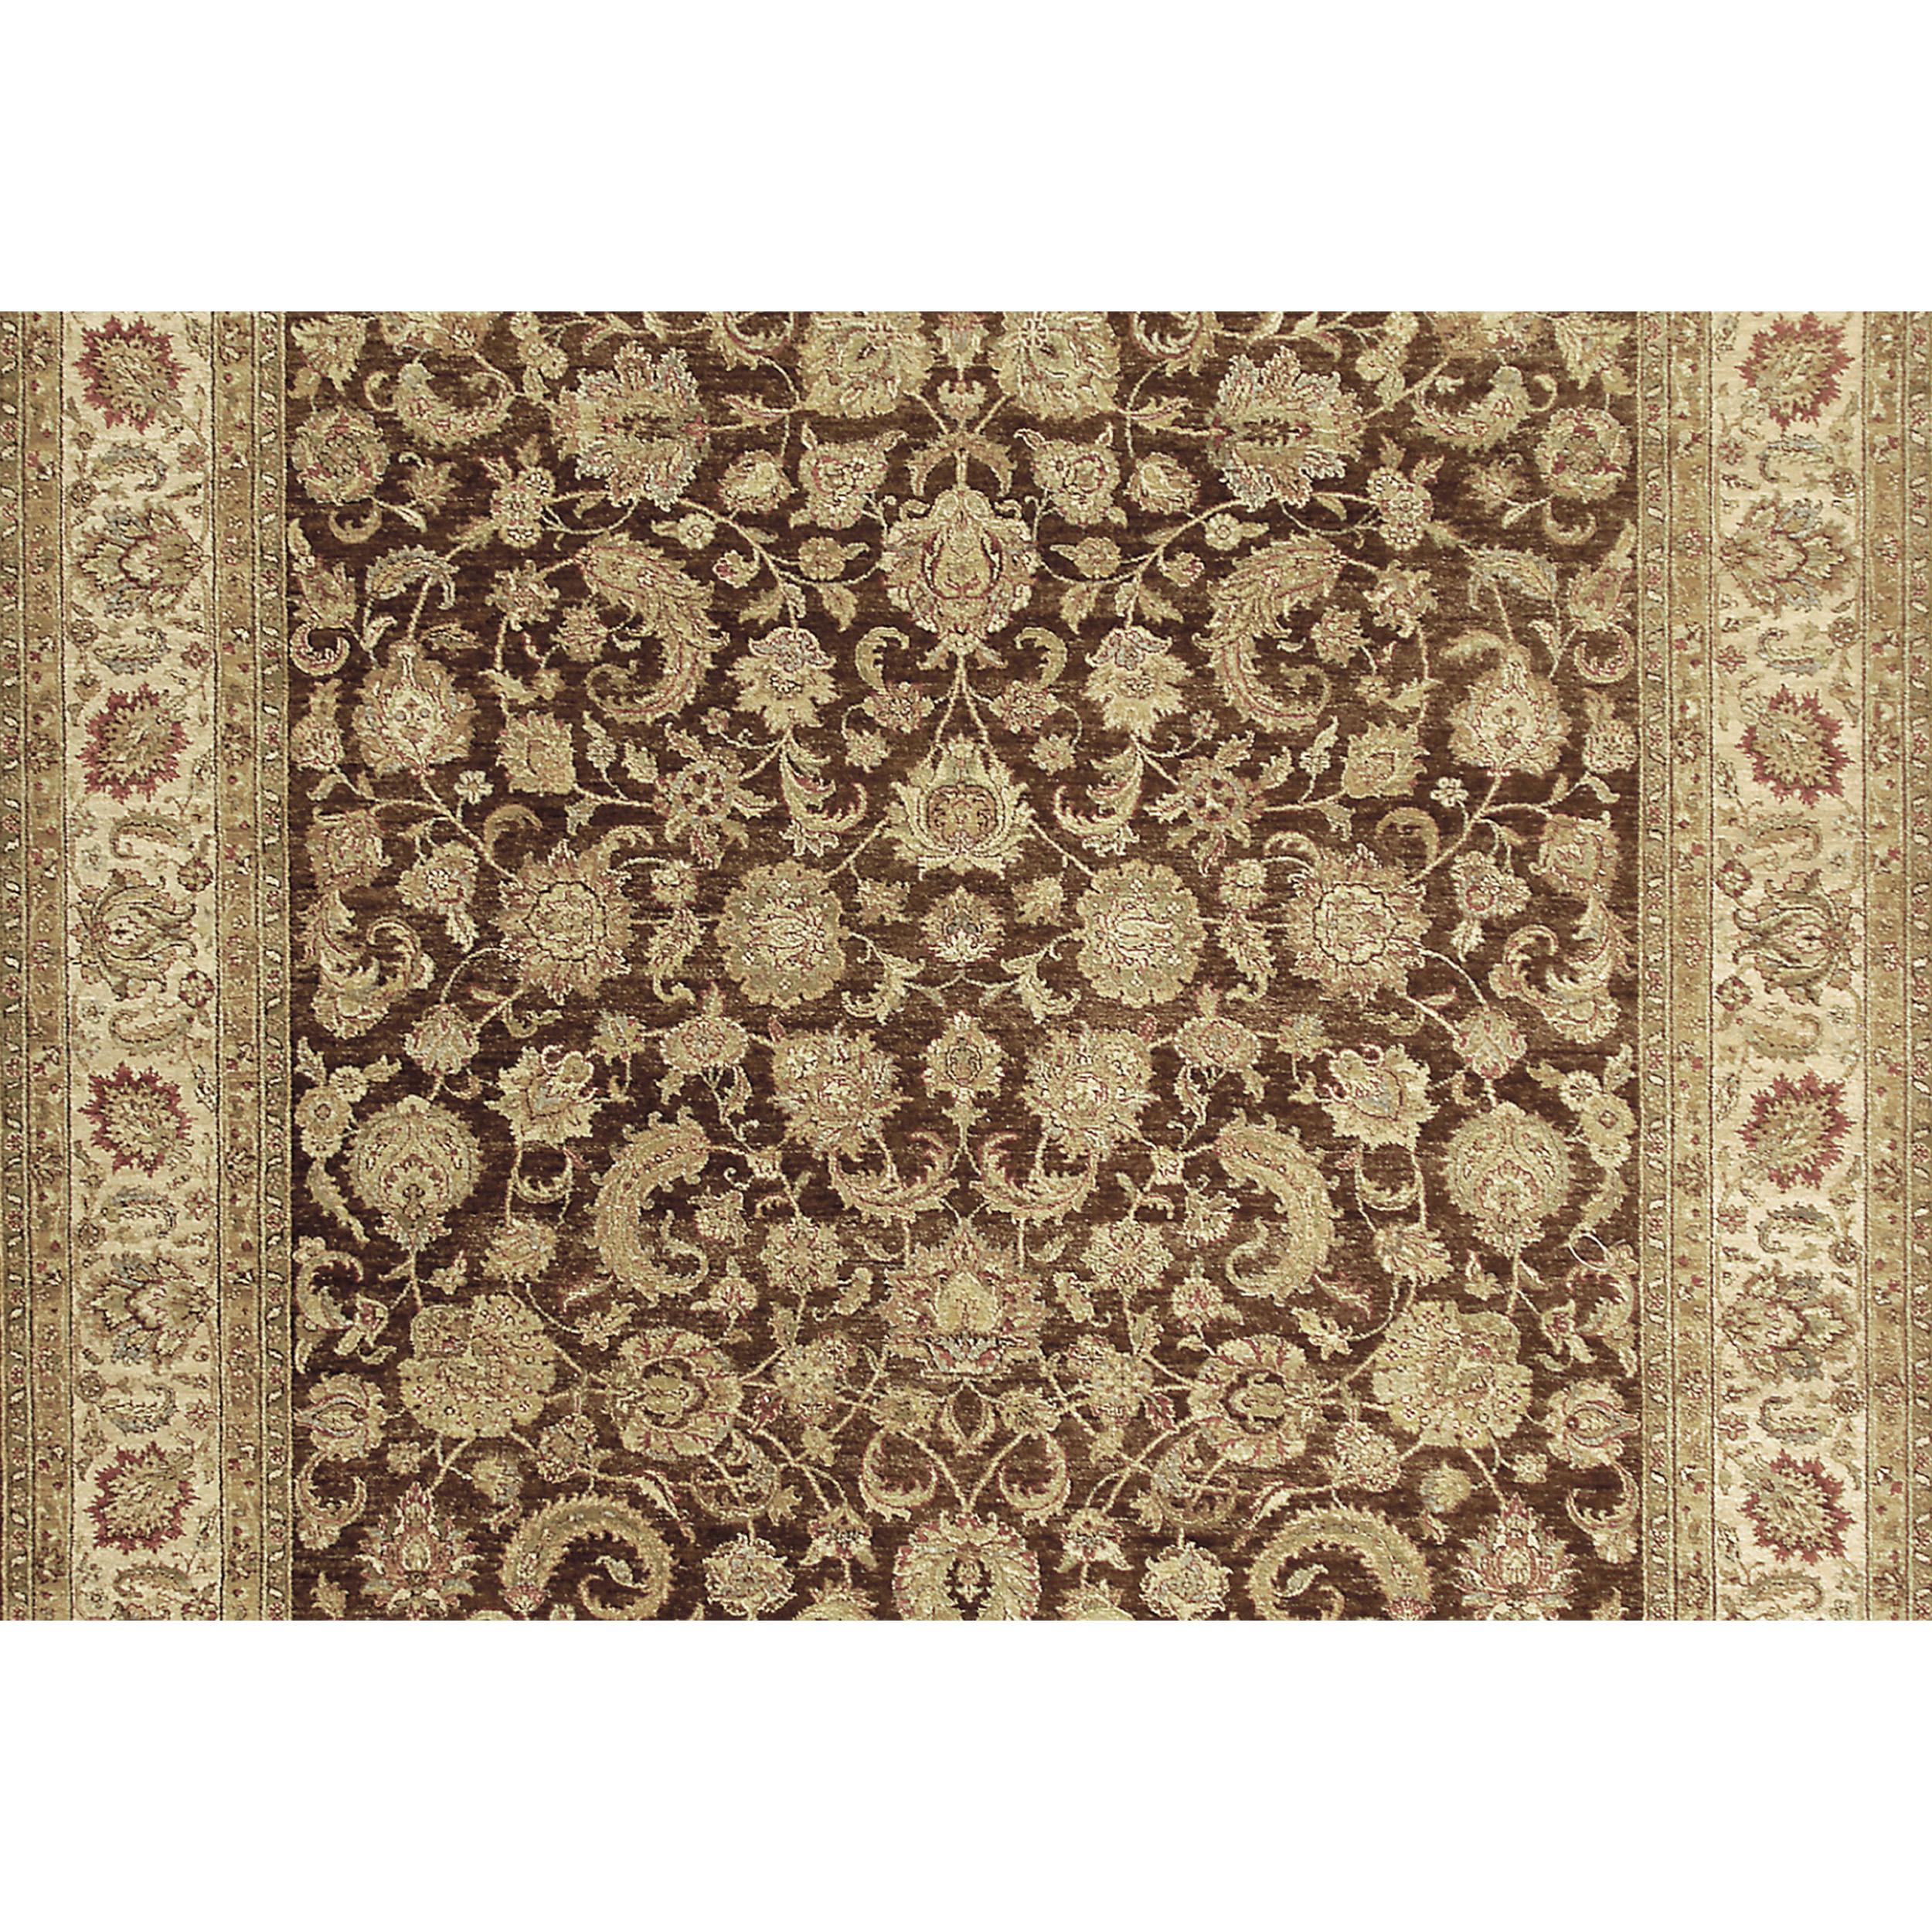 Indian Luxury Traditional Hand-Knotted Brown/Cream 12x18 Rug For Sale